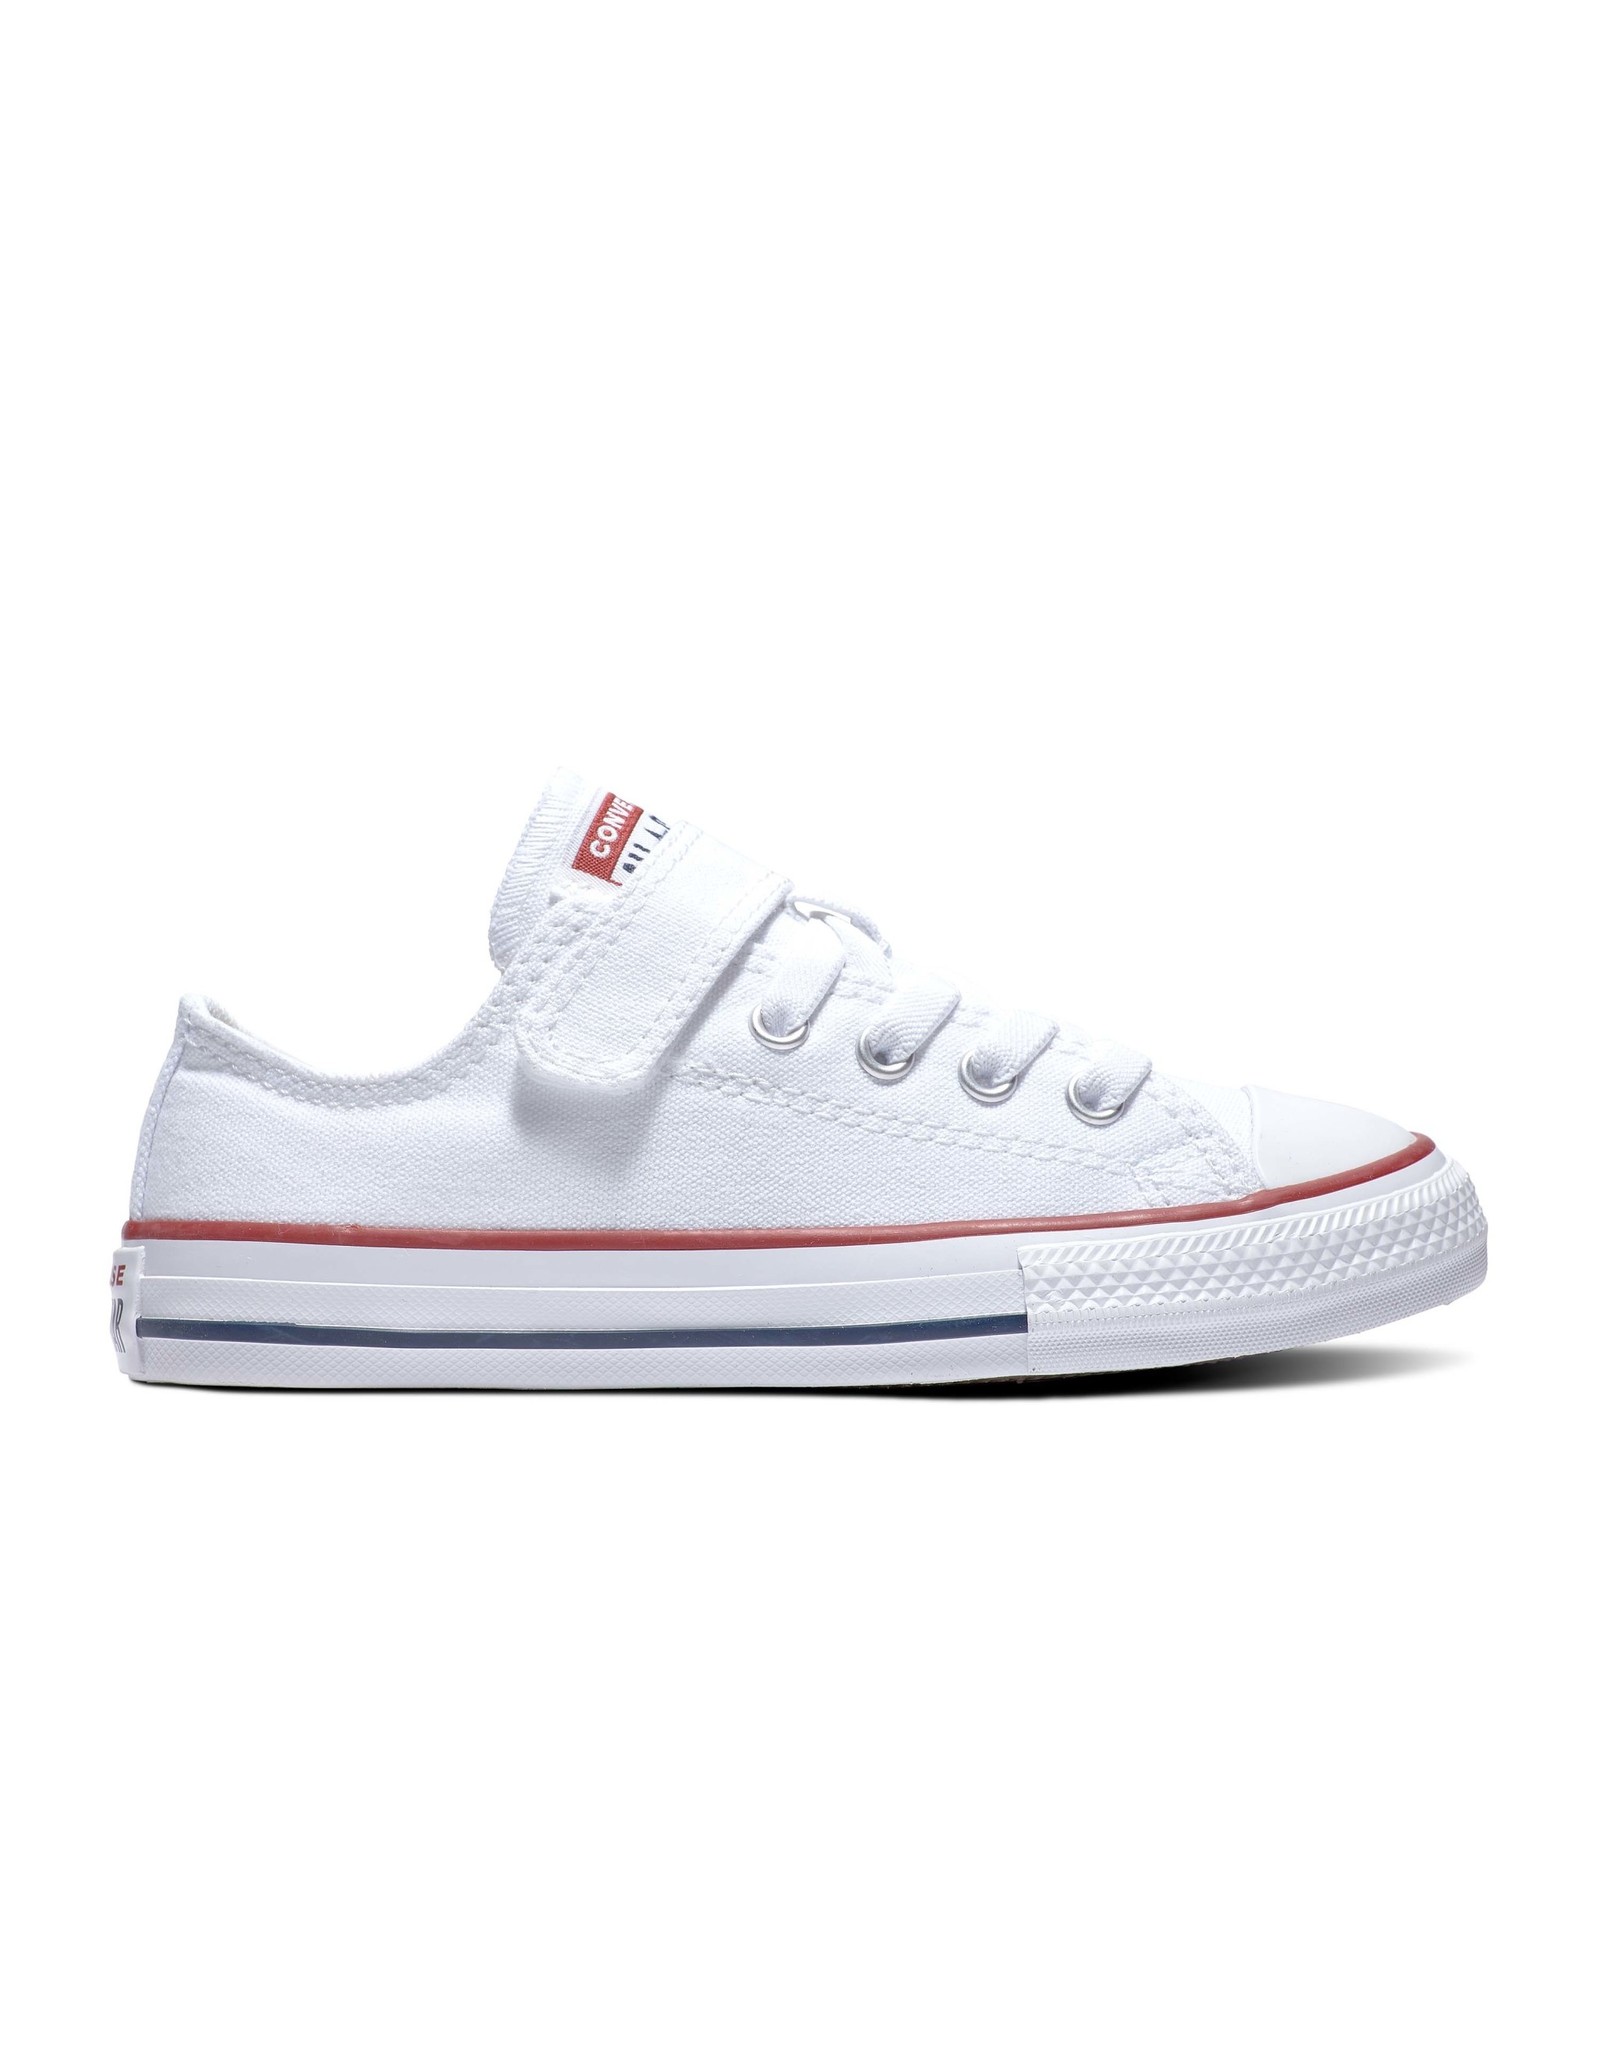 CONVERSE Chuck Taylor All Star 1V OX WHITE/WHITE/NATURAL CDVOPX-372882C